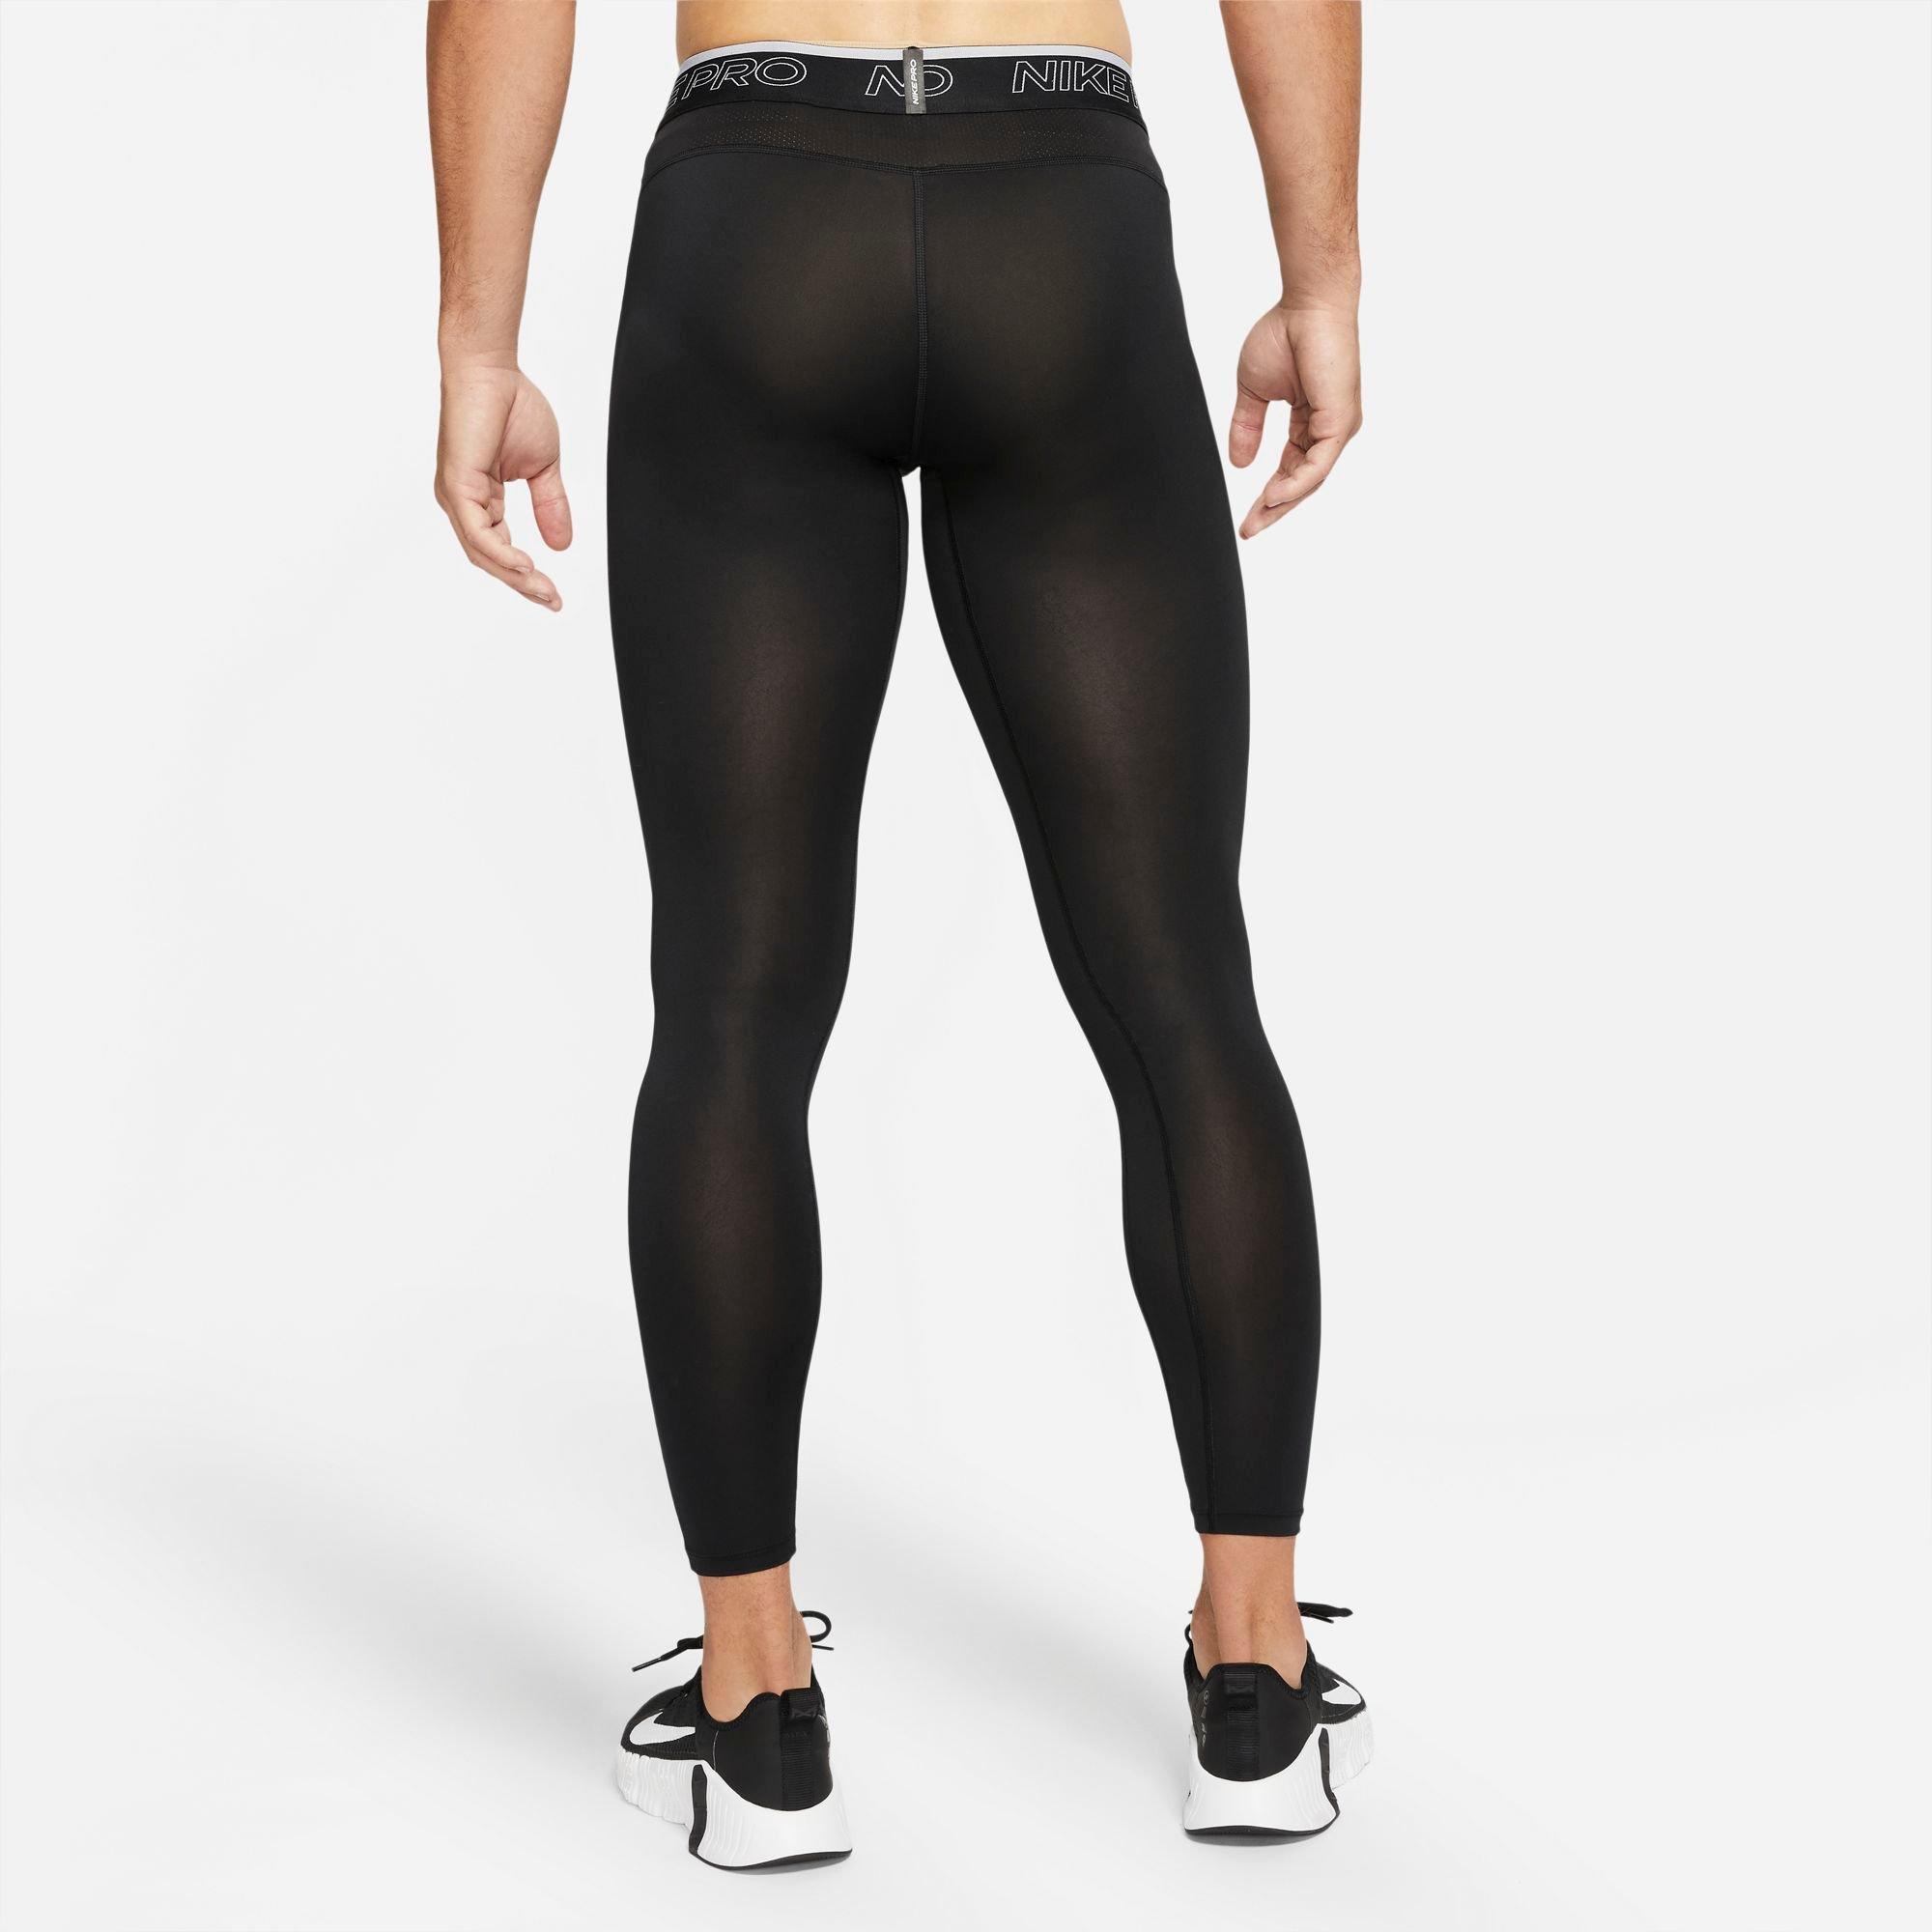 Nike Pro Hyperwarm Velour Tights Leggings in Black by Nike from Carbon38